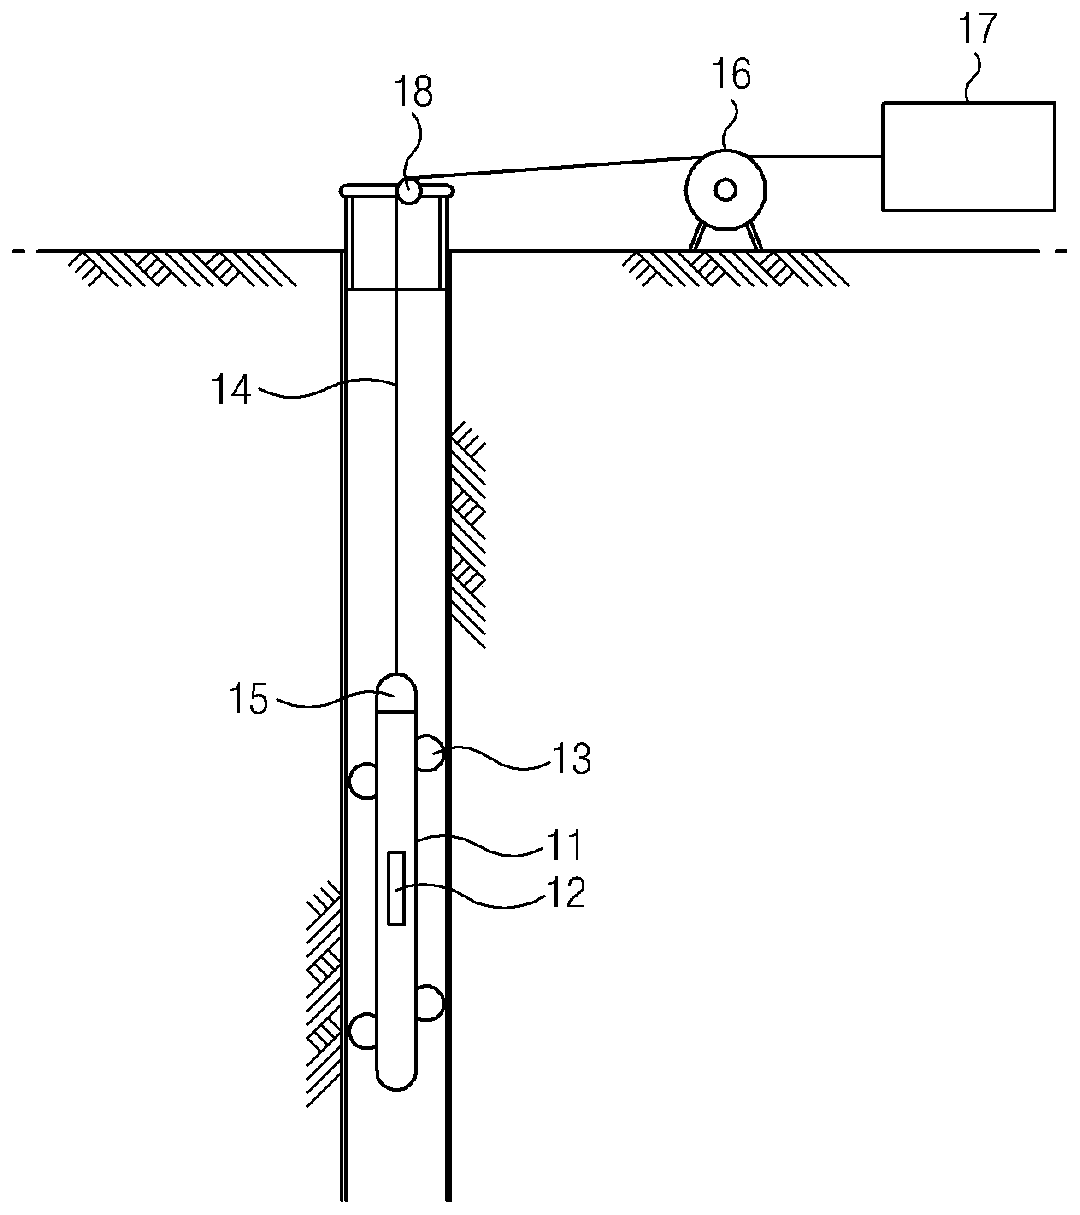 Inclinometer system